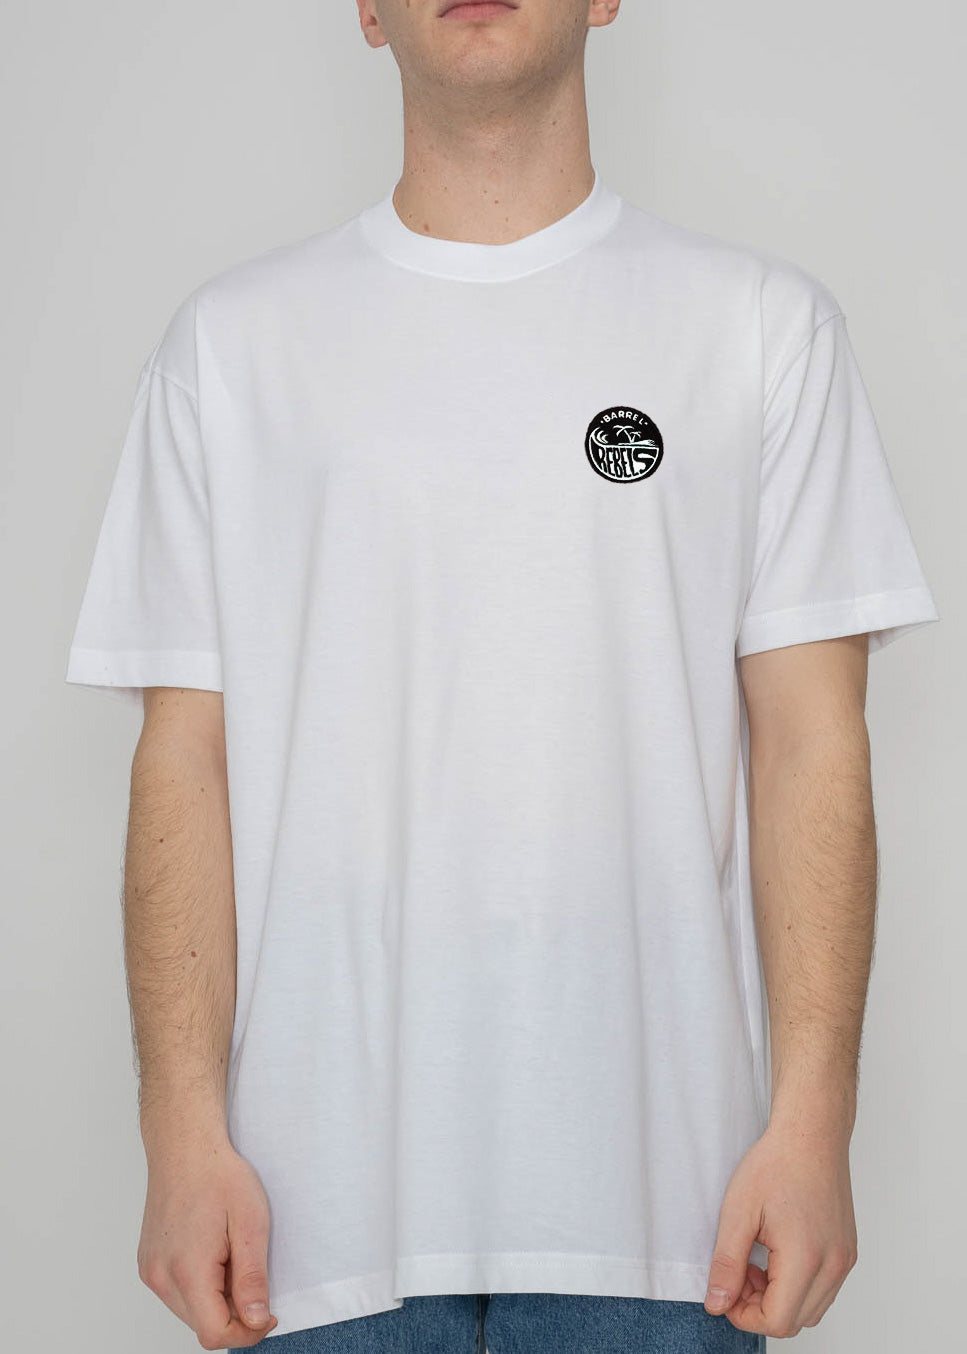 WHITE X EMBROIDERED REBELS T-SHIRT